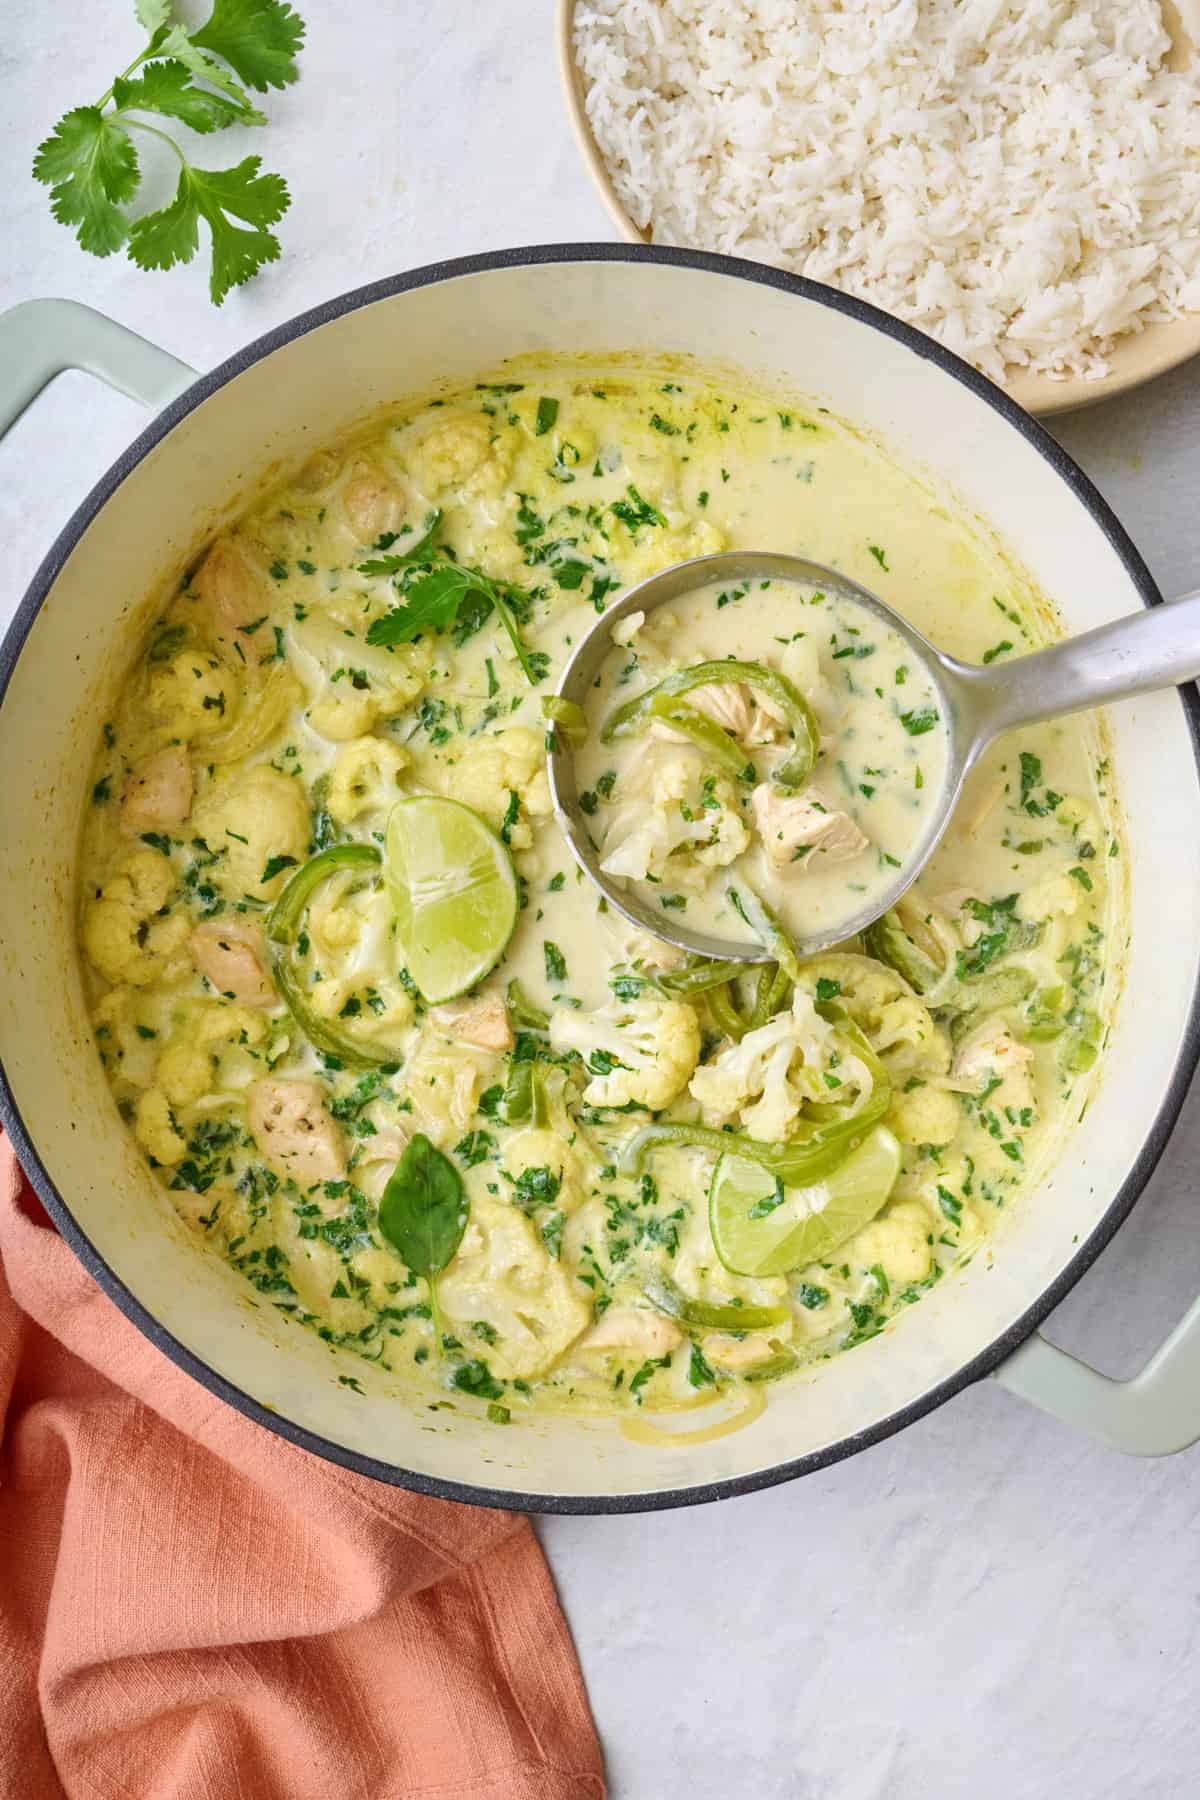 Green thai curry chicken in a pot with a ladle lifting some up.